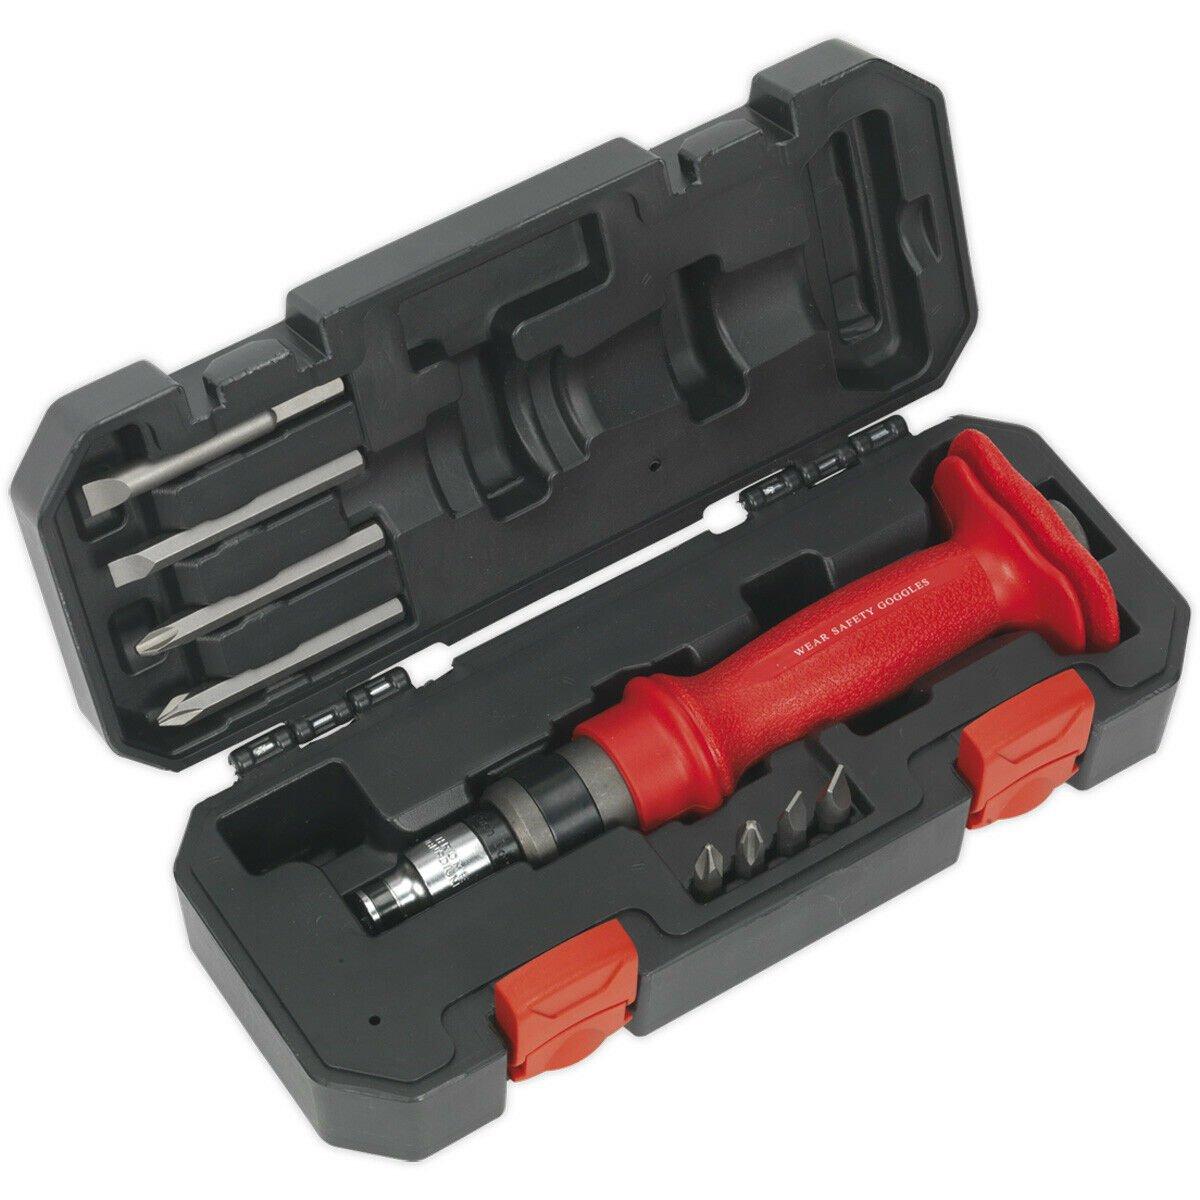 10 PACK Heavy Duty Impact Driver Set - Manual Tight Screw Remover Hammer Strike